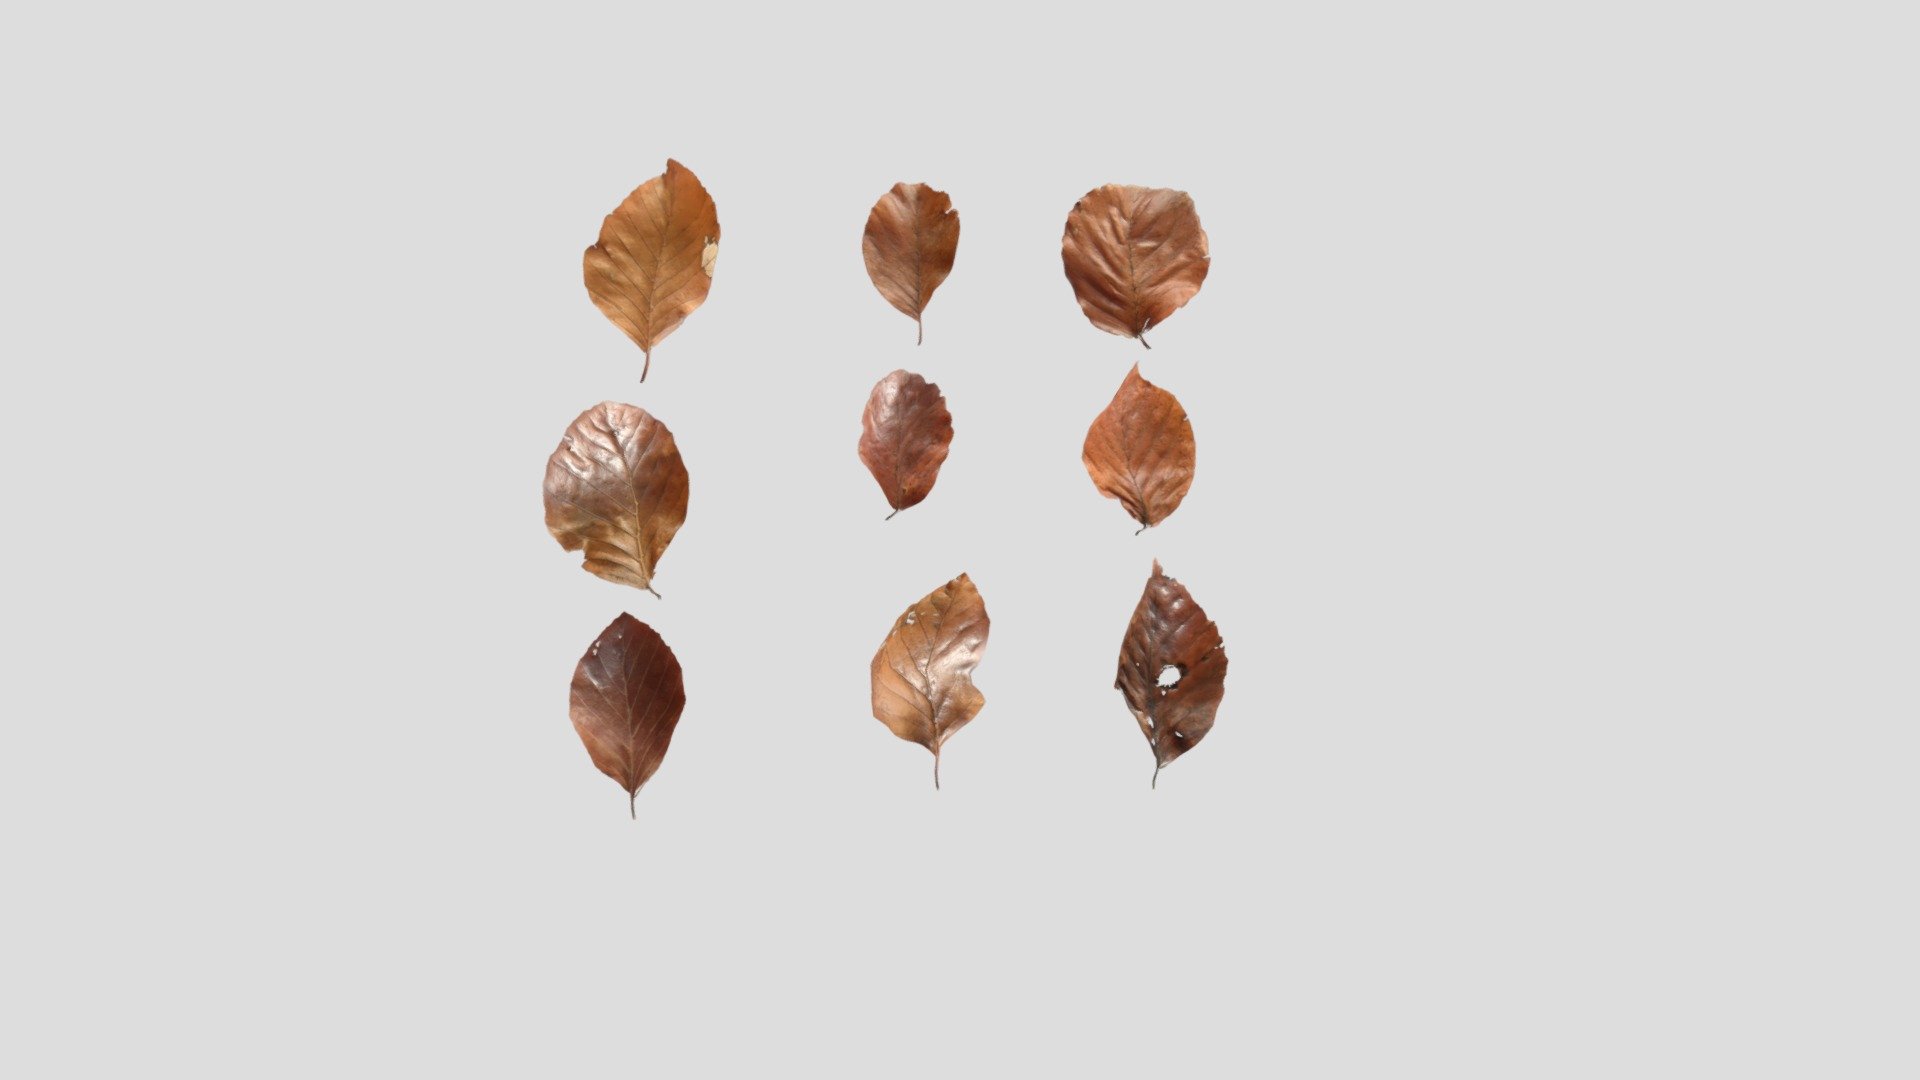 Hi all,

This is dry beech leaves pack created in Blender. It includes 9 different models in real world scale (6cm-10cm). It comes in following formats:

.blend

.fbx

.obj

The blender file has the shaders set up, so it's ready to render using Cycles. The title image is not included.

It also comes with set of 4K .png maps:

base color

roughness

normal

opacity

translucency - Dry Beech Leaves - Buy Royalty Free 3D model by kambur 3d model